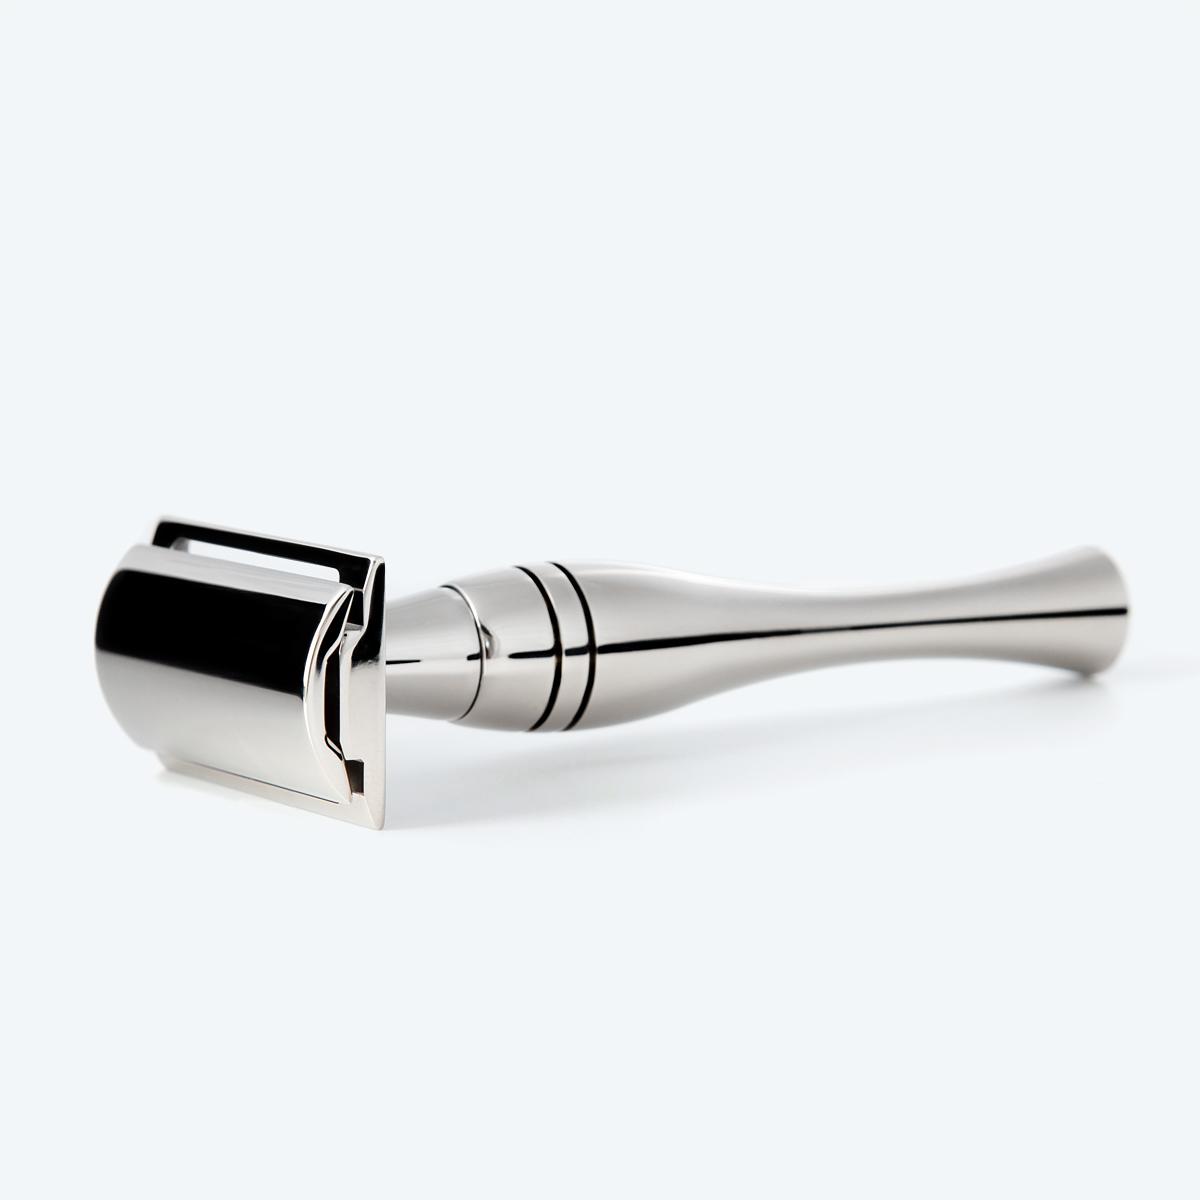 made in UK stainless steel safety razor